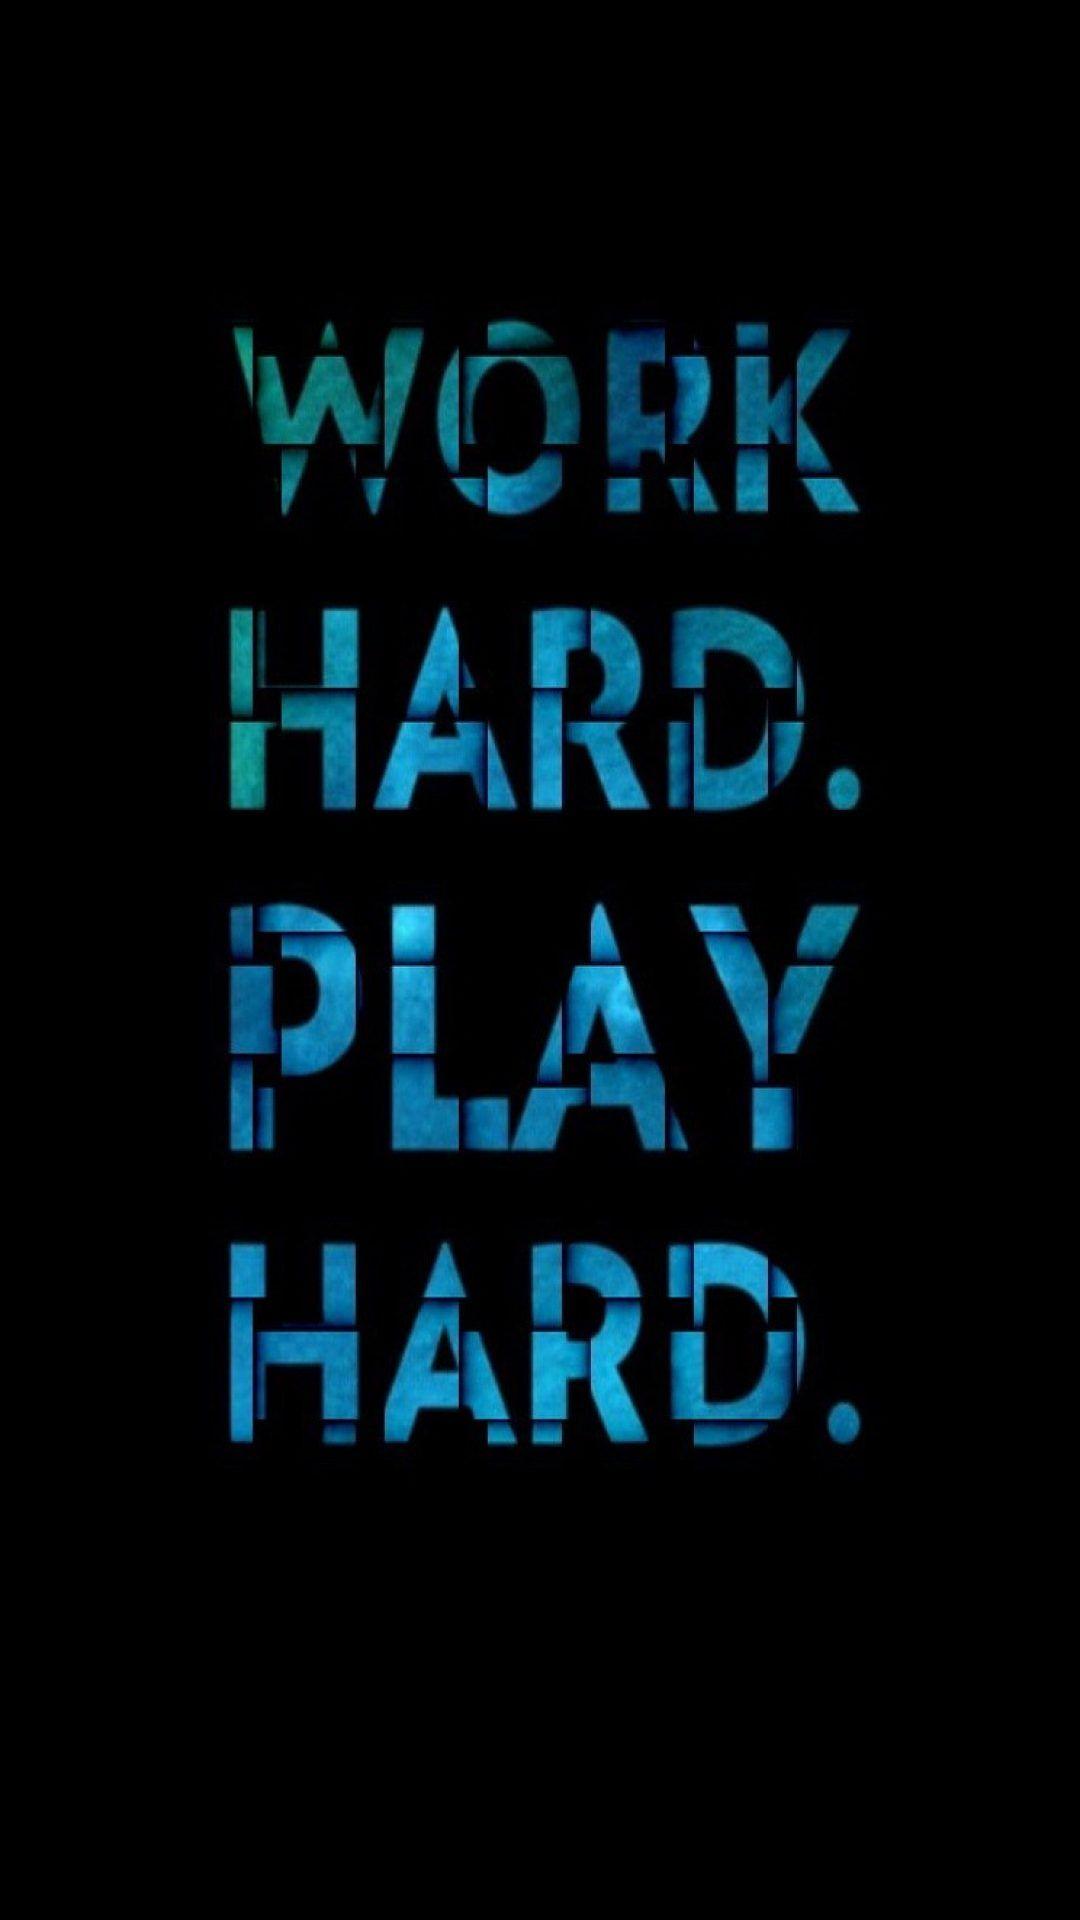 Inspirational Quotes Wallpaper for Mobile (6 of 20) Hard Play Hard Wallpaper. Wallpaper Download. High Resolution Wallpaper. Inspirational quotes wallpaper, Inspirational quotes, Wallpaper quotes